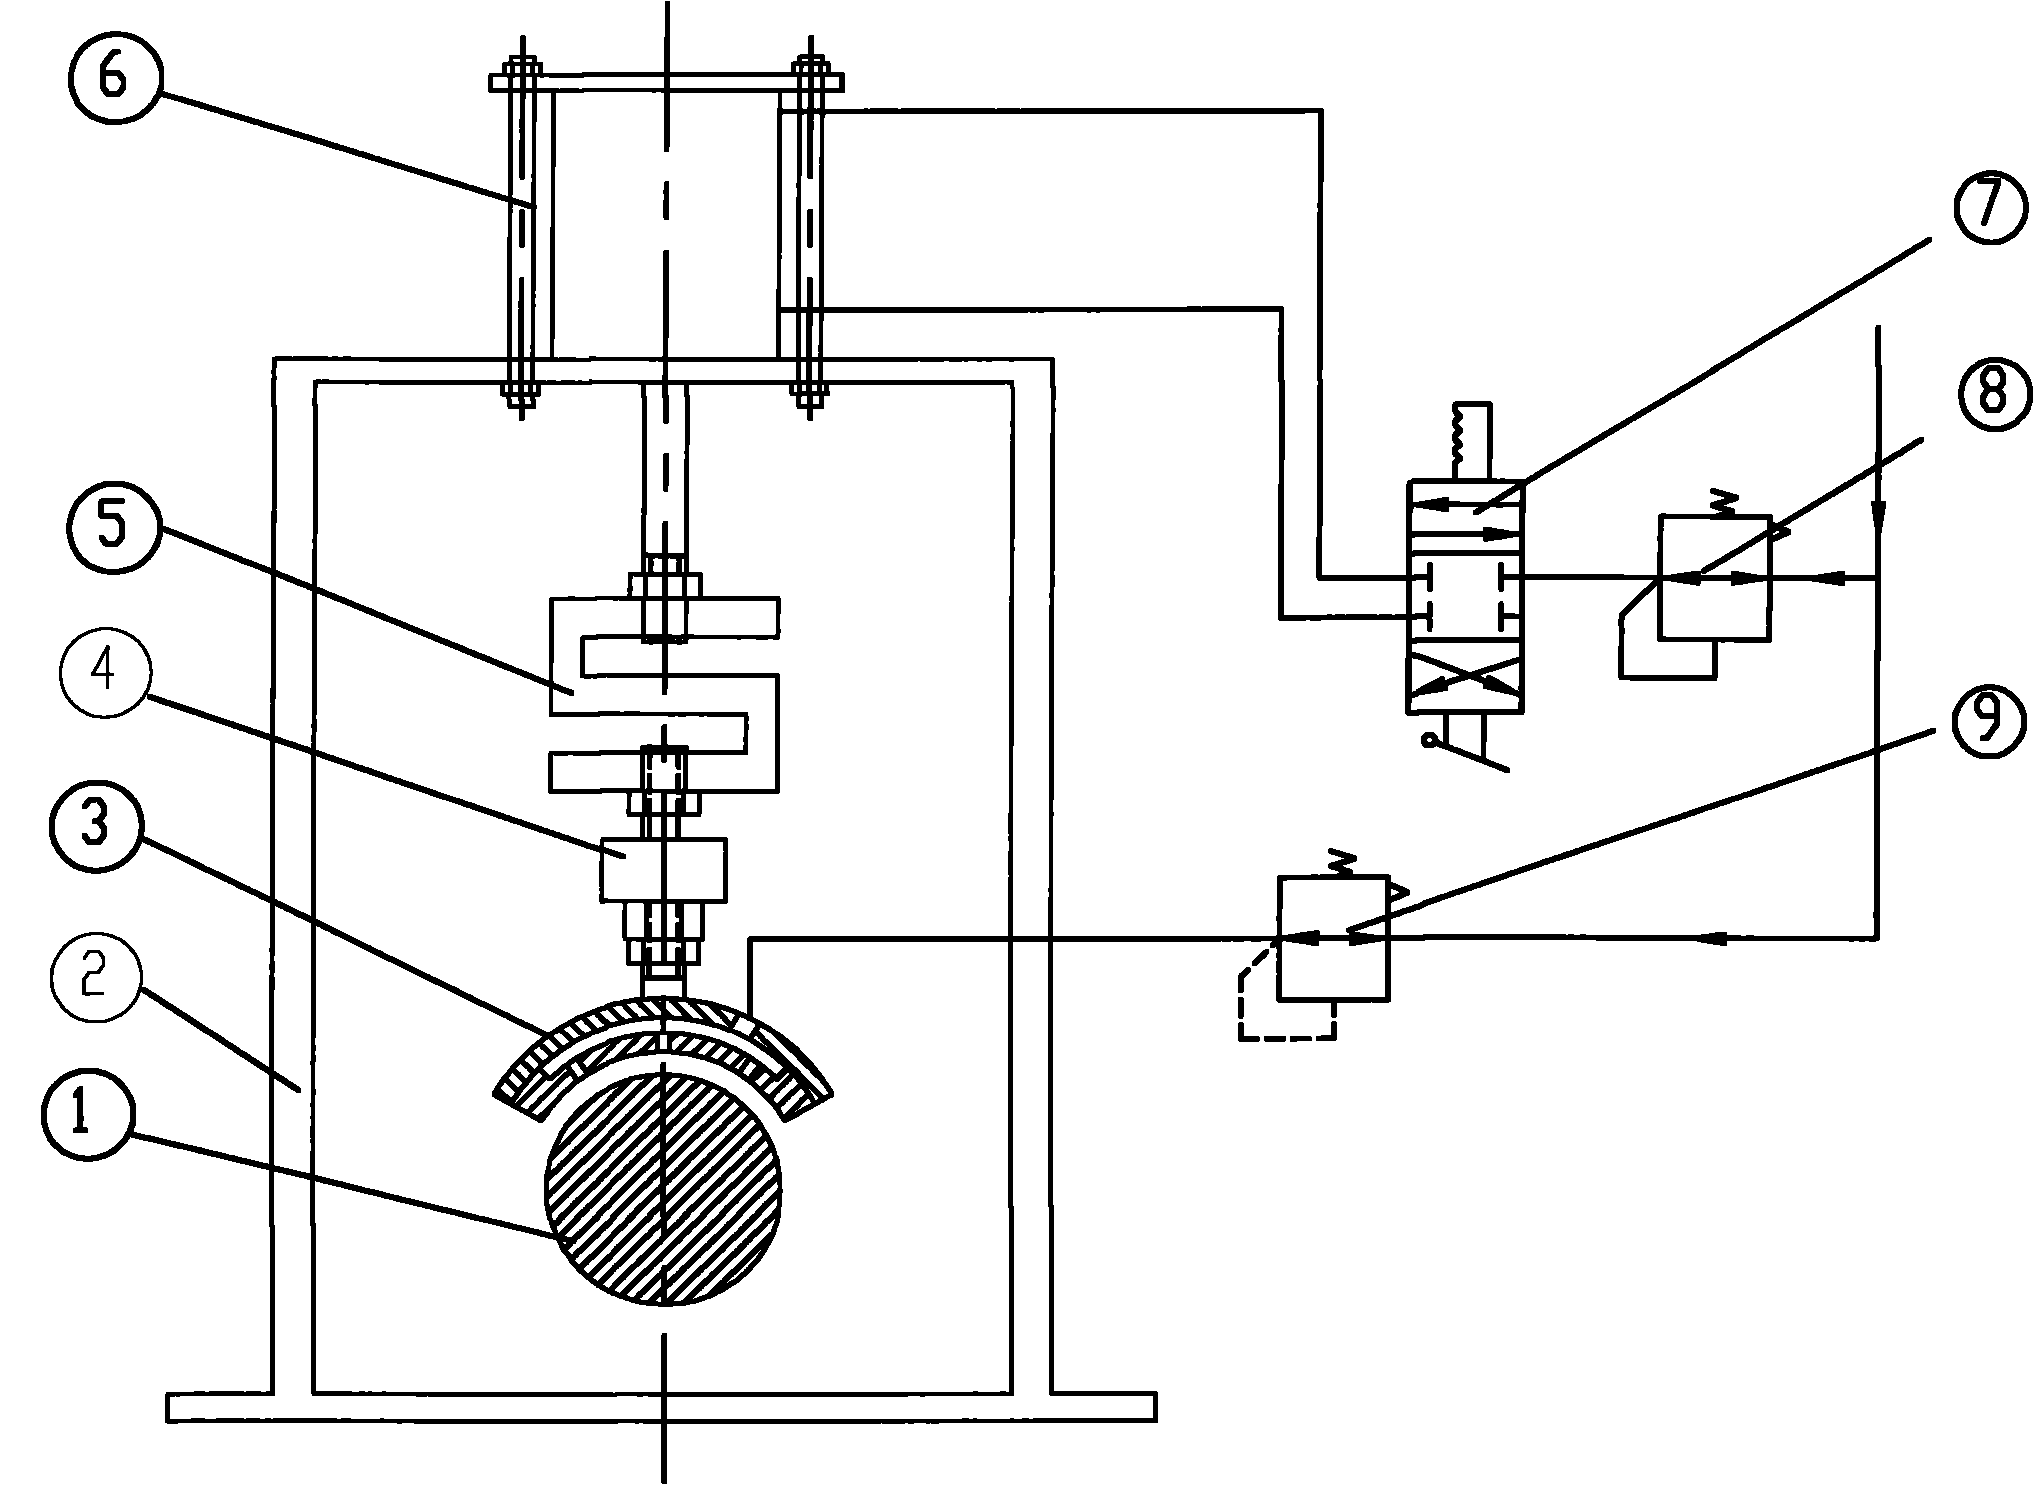 Bearing-rotor system loading test device and method